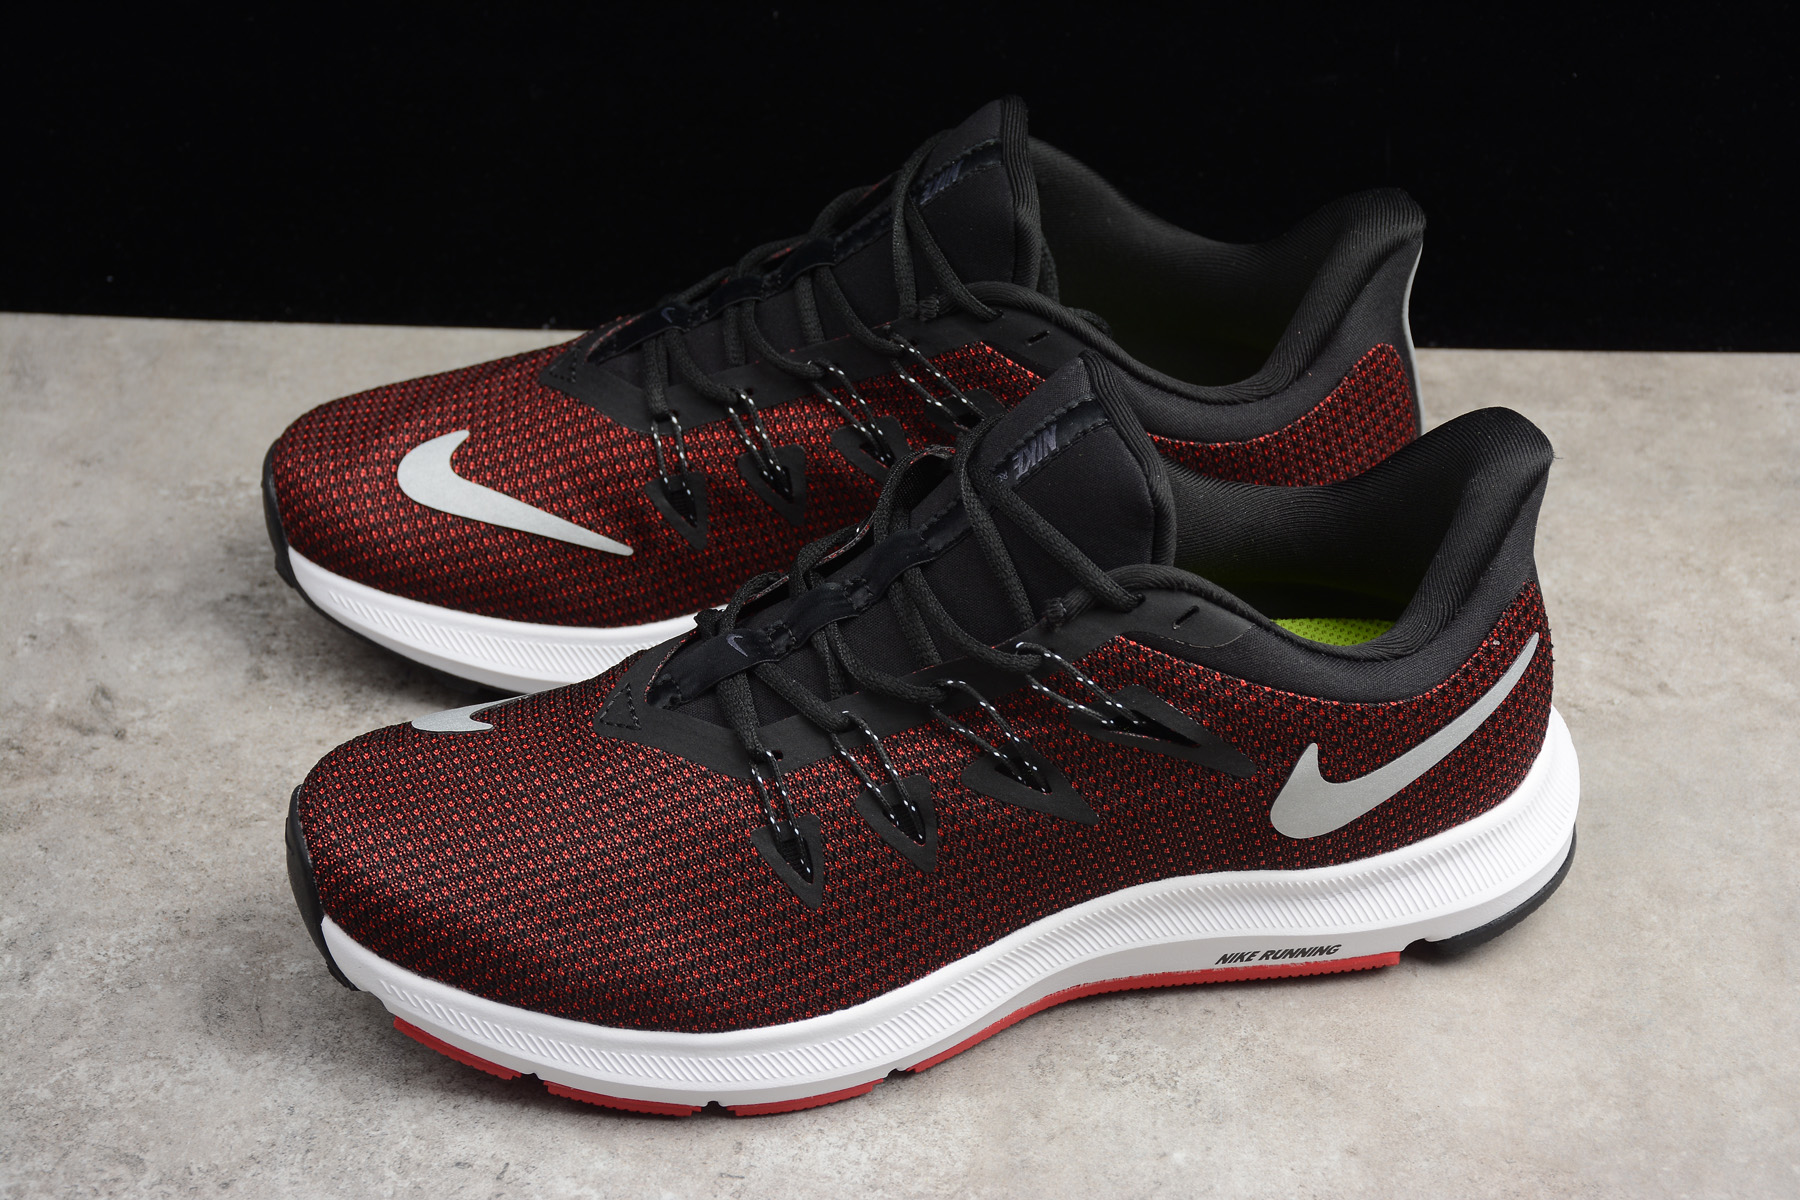 Nike Quest II Wine Red Black White Running Shoes